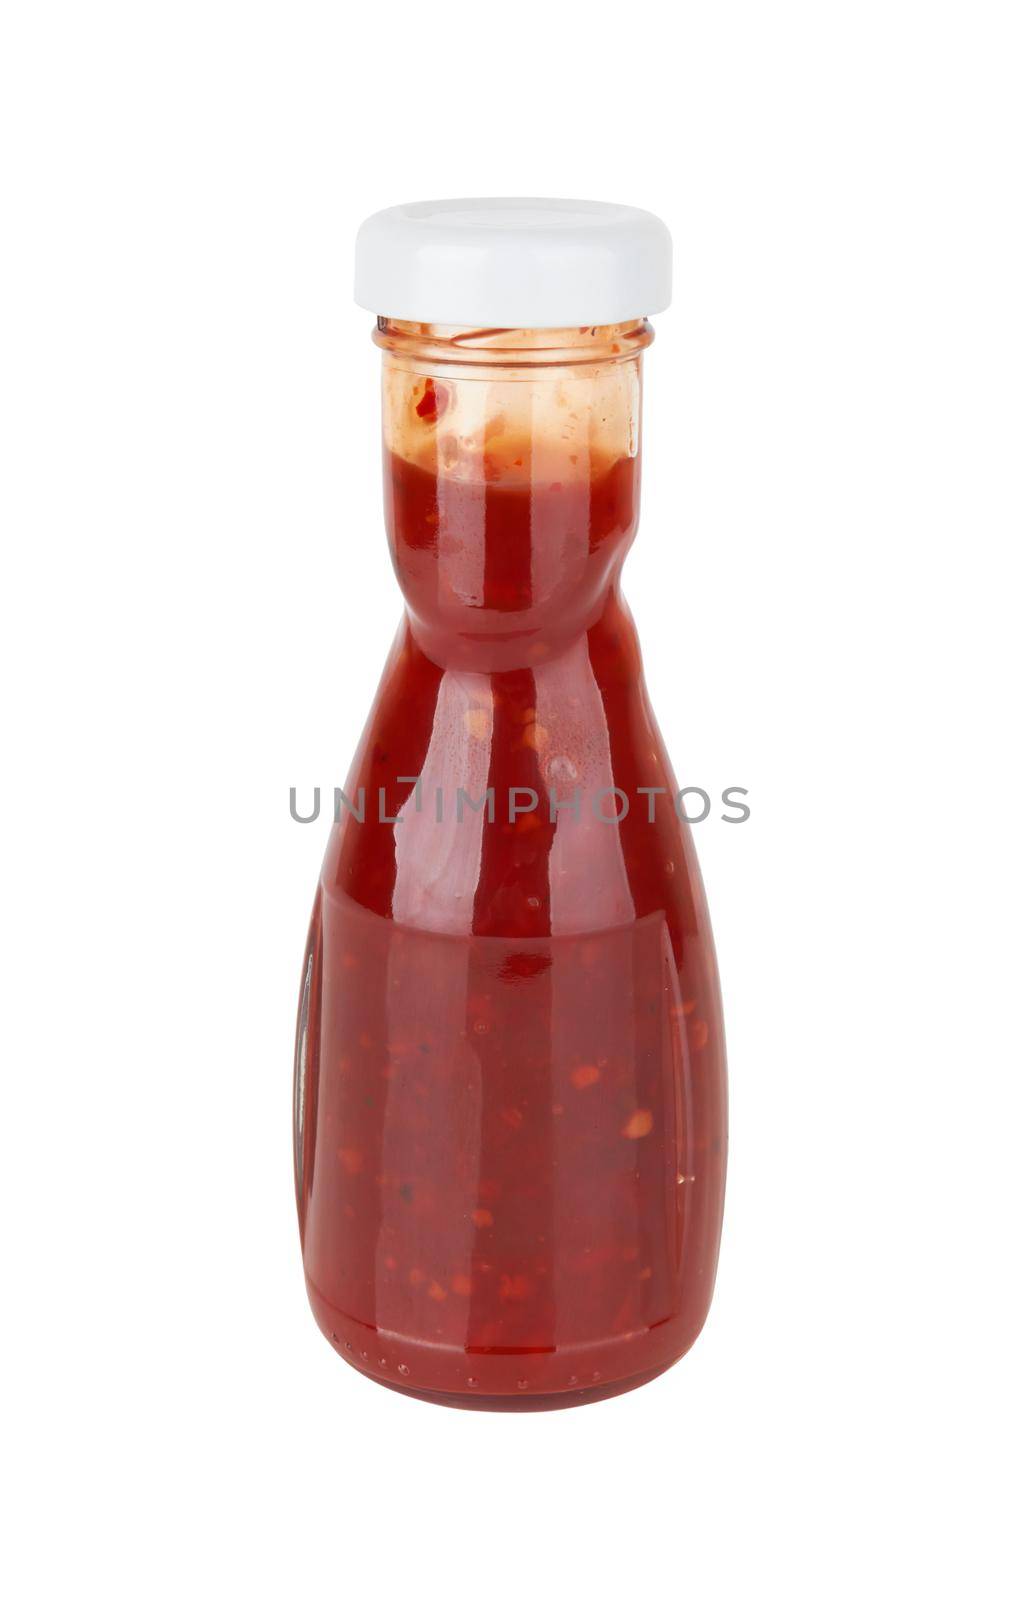 Bottle of tomato sauce or ketchup isolated on white background